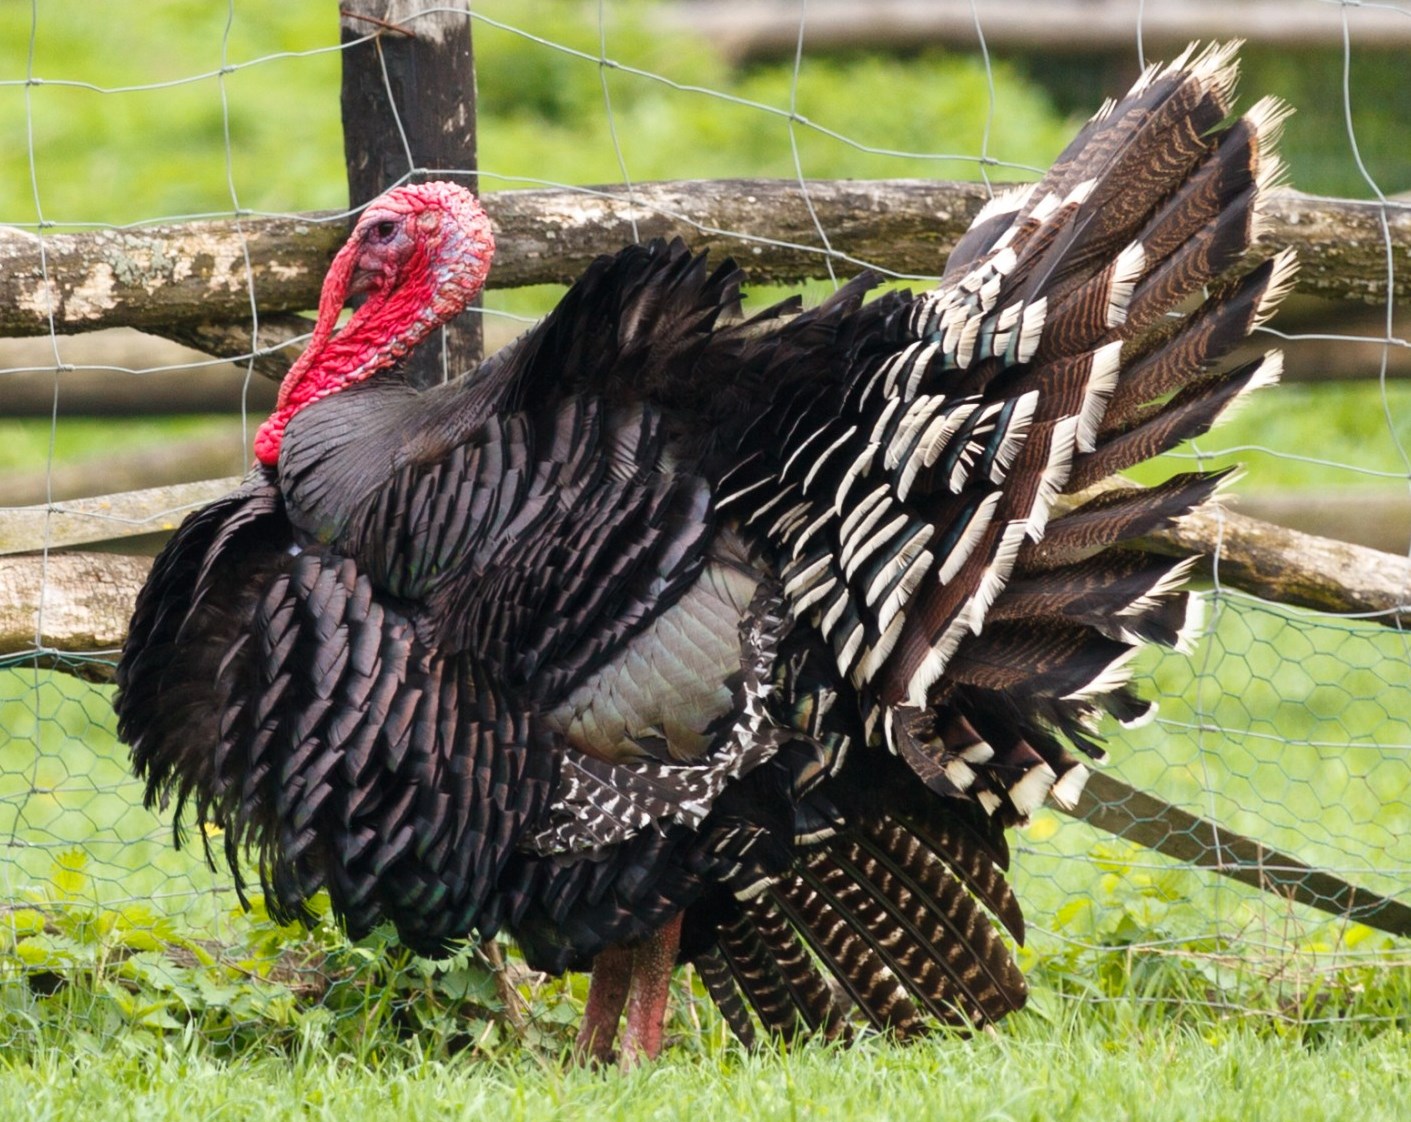 This Company Uses Turkey Poop for Biofuel